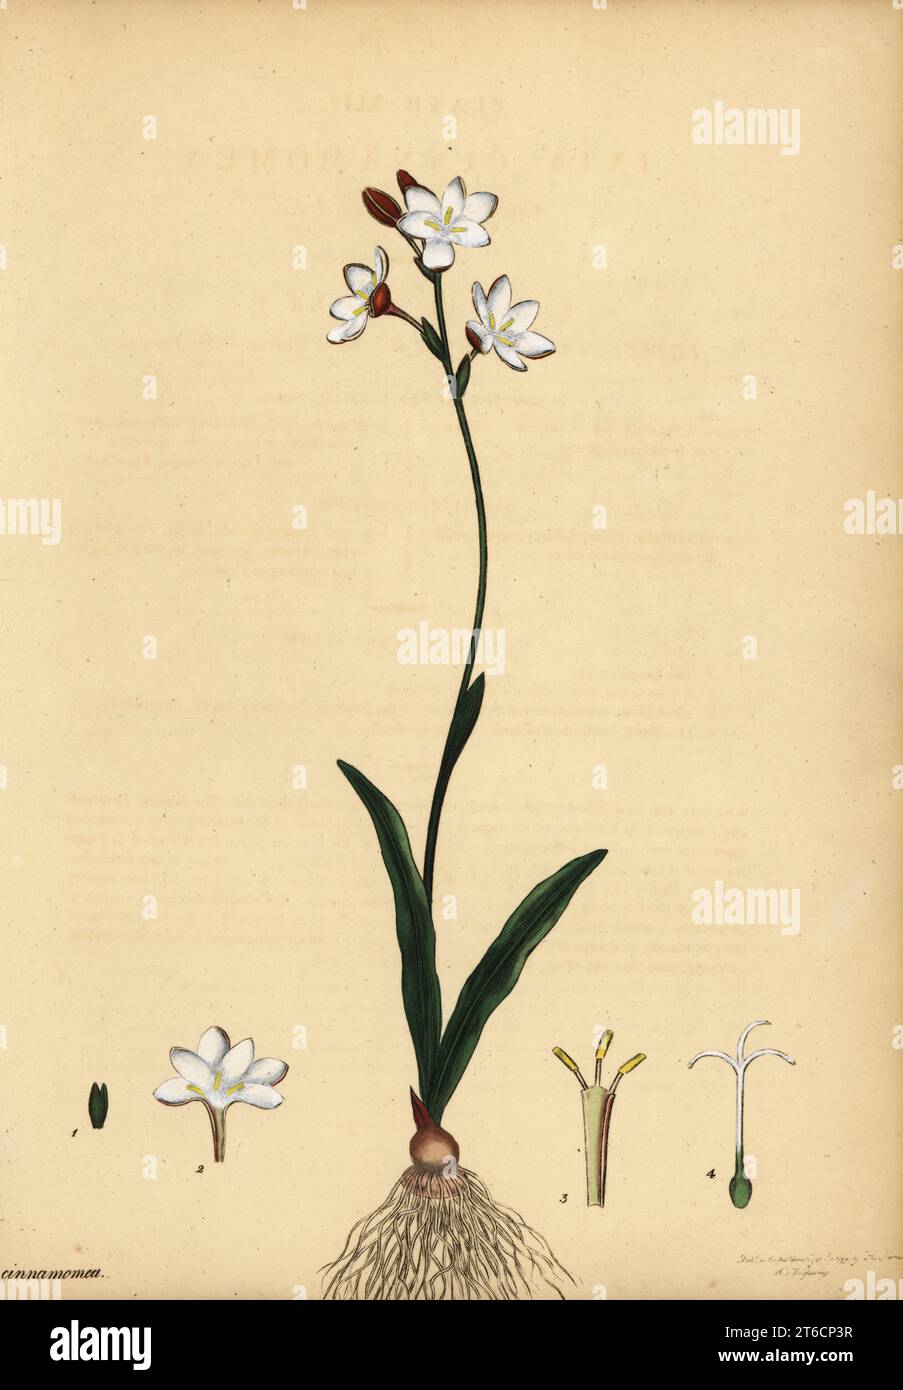 Bontrokkie, Hesperantha falcata. South Africa. Cinnamon-smelling ixia, Ixia cinnamomea. Copperplate engraving drawn, engraved and hand-coloured by Henry Andrews from his Botanical Register, Volume 1, published in London, 1799. Stock Photo